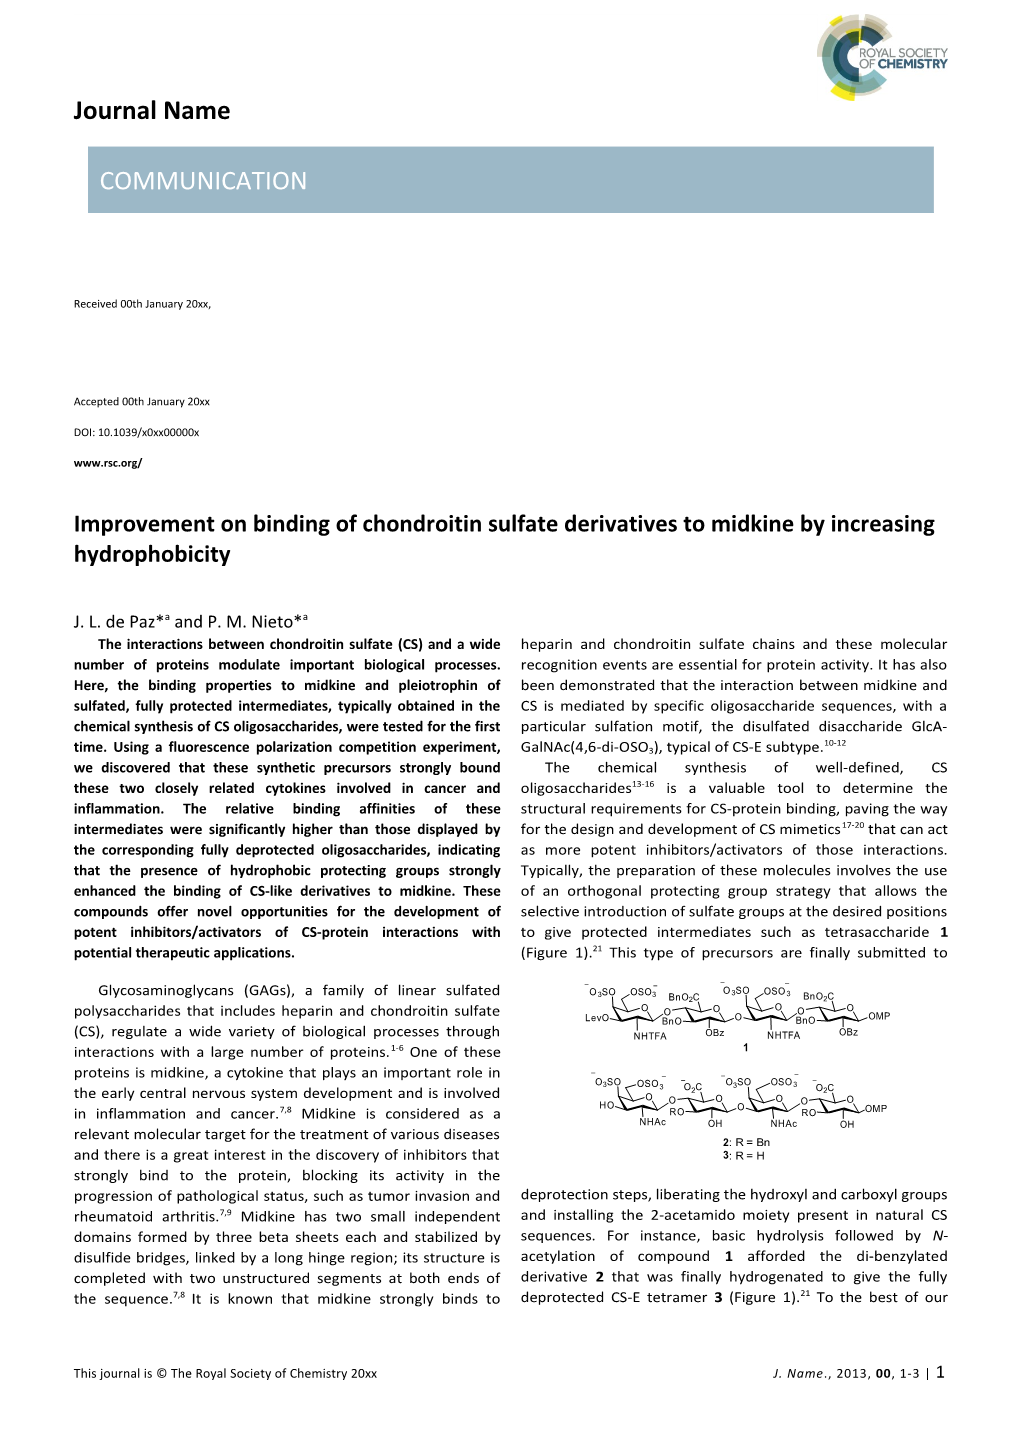 Improvement on Binding of Chondroitin Sulfate Derivatives to Midkine by Increasing